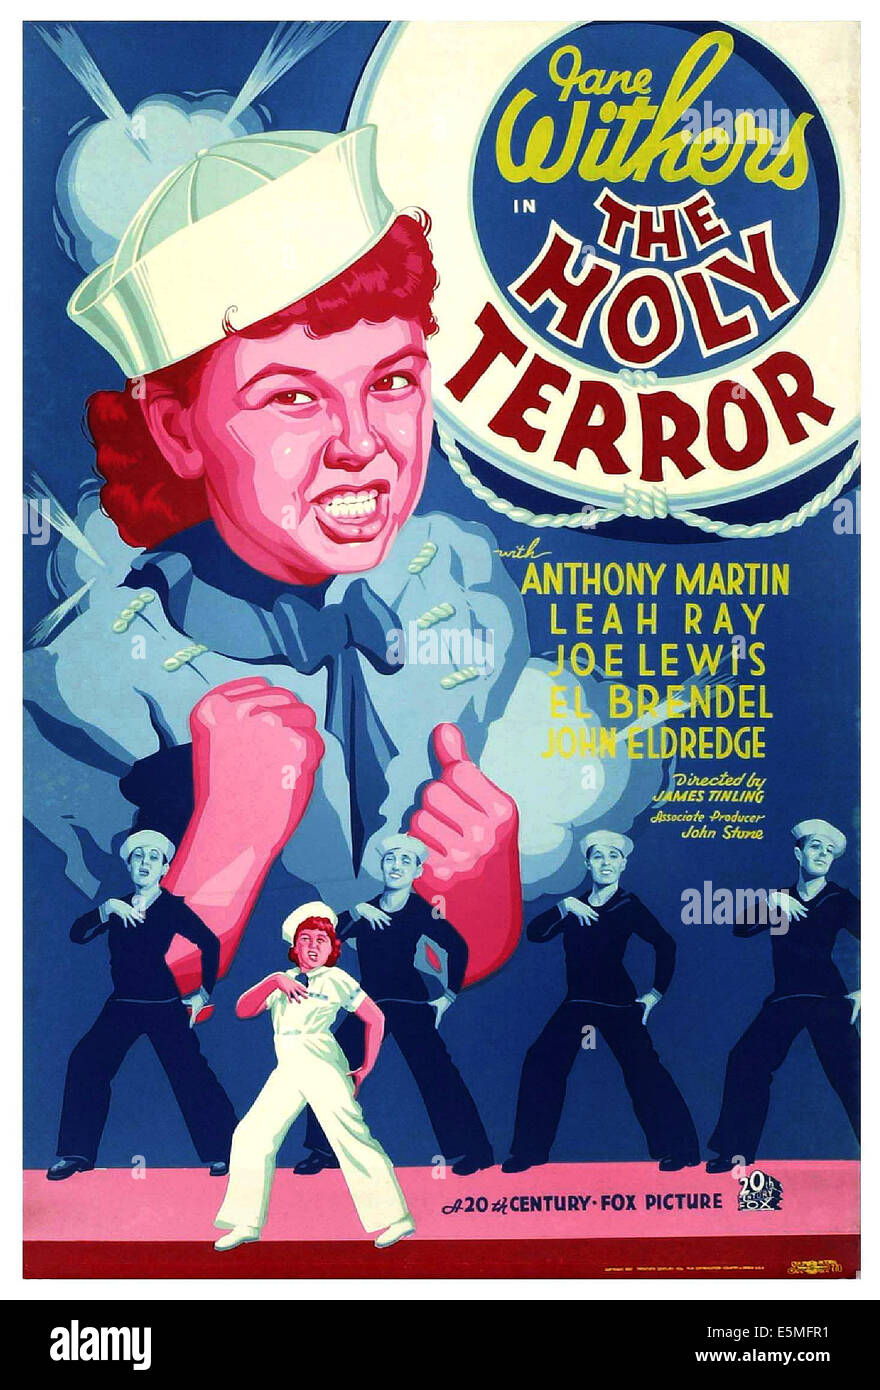 https://c8.alamy.com/comp/E5MFR1/the-holy-terror-us-poster-art-jane-withers-times-two-1937-tm-copyright-E5MFR1.jpg